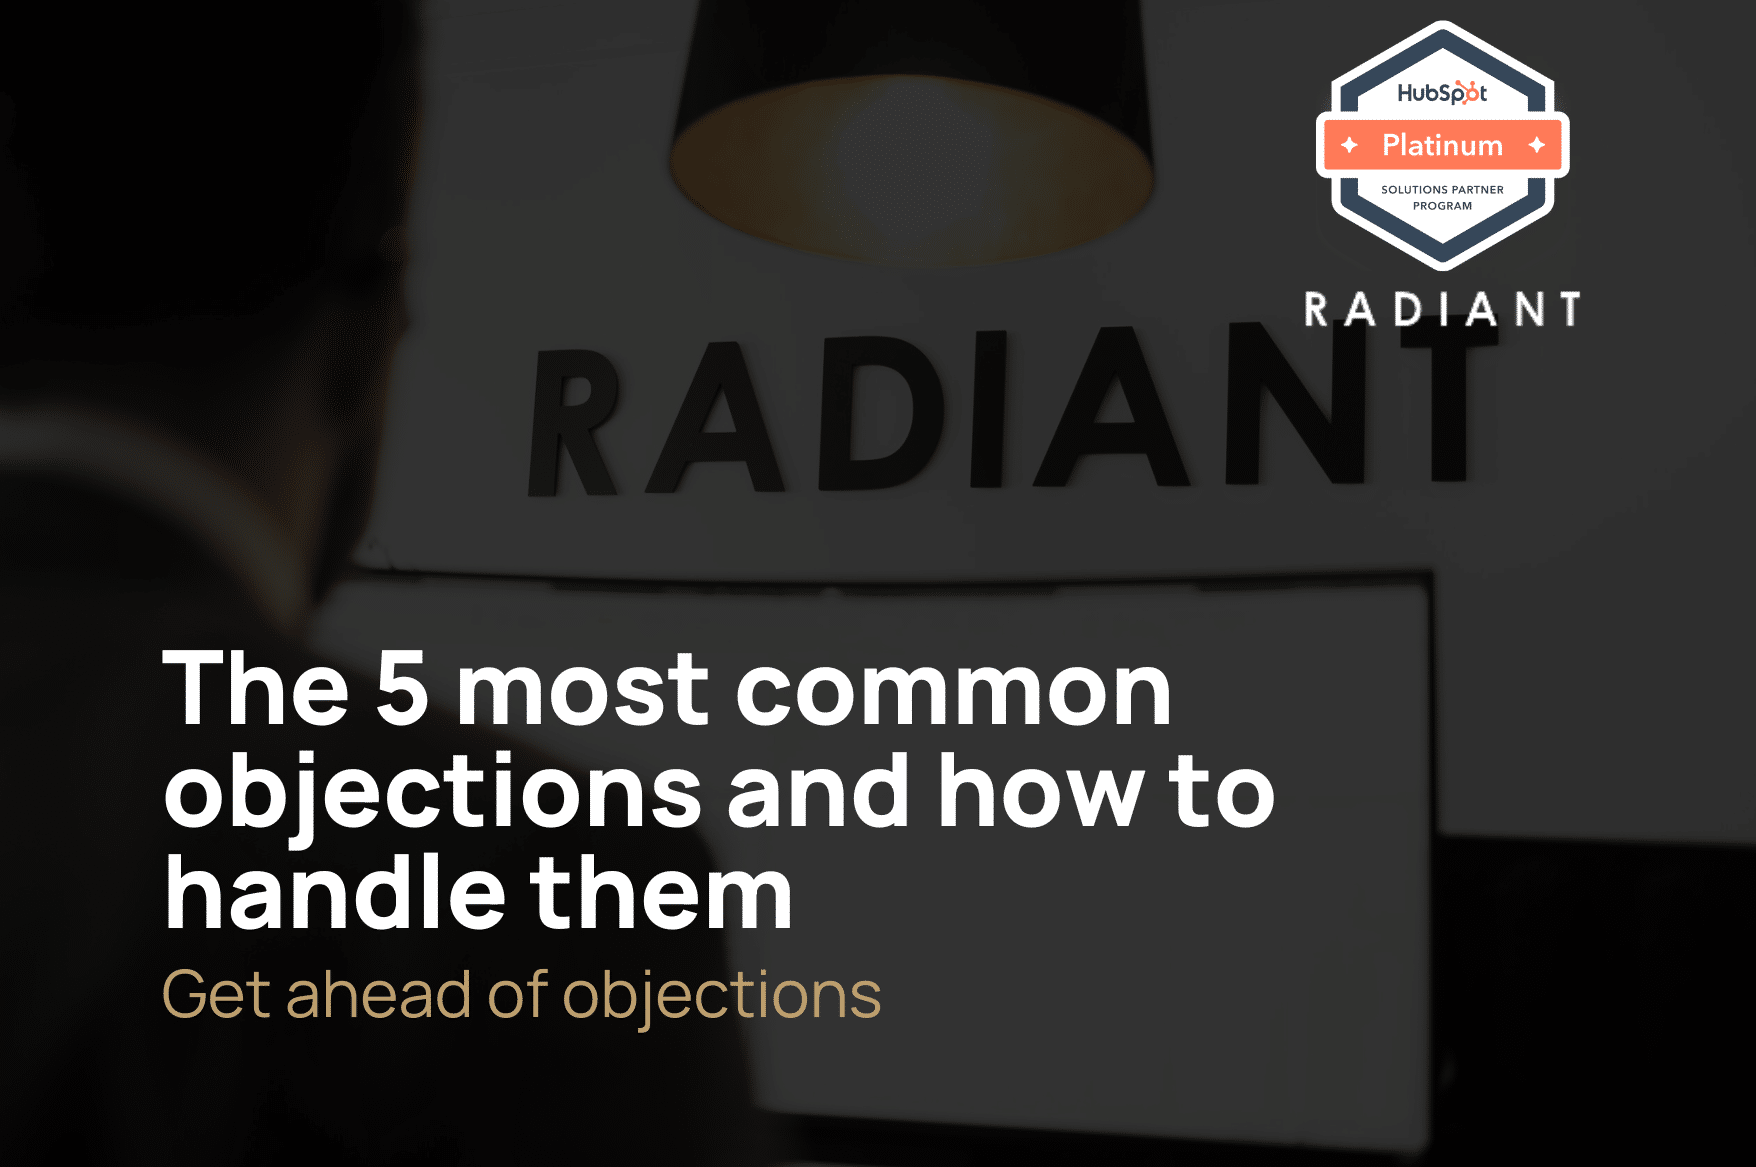 The 5 most common objections and how to handle them